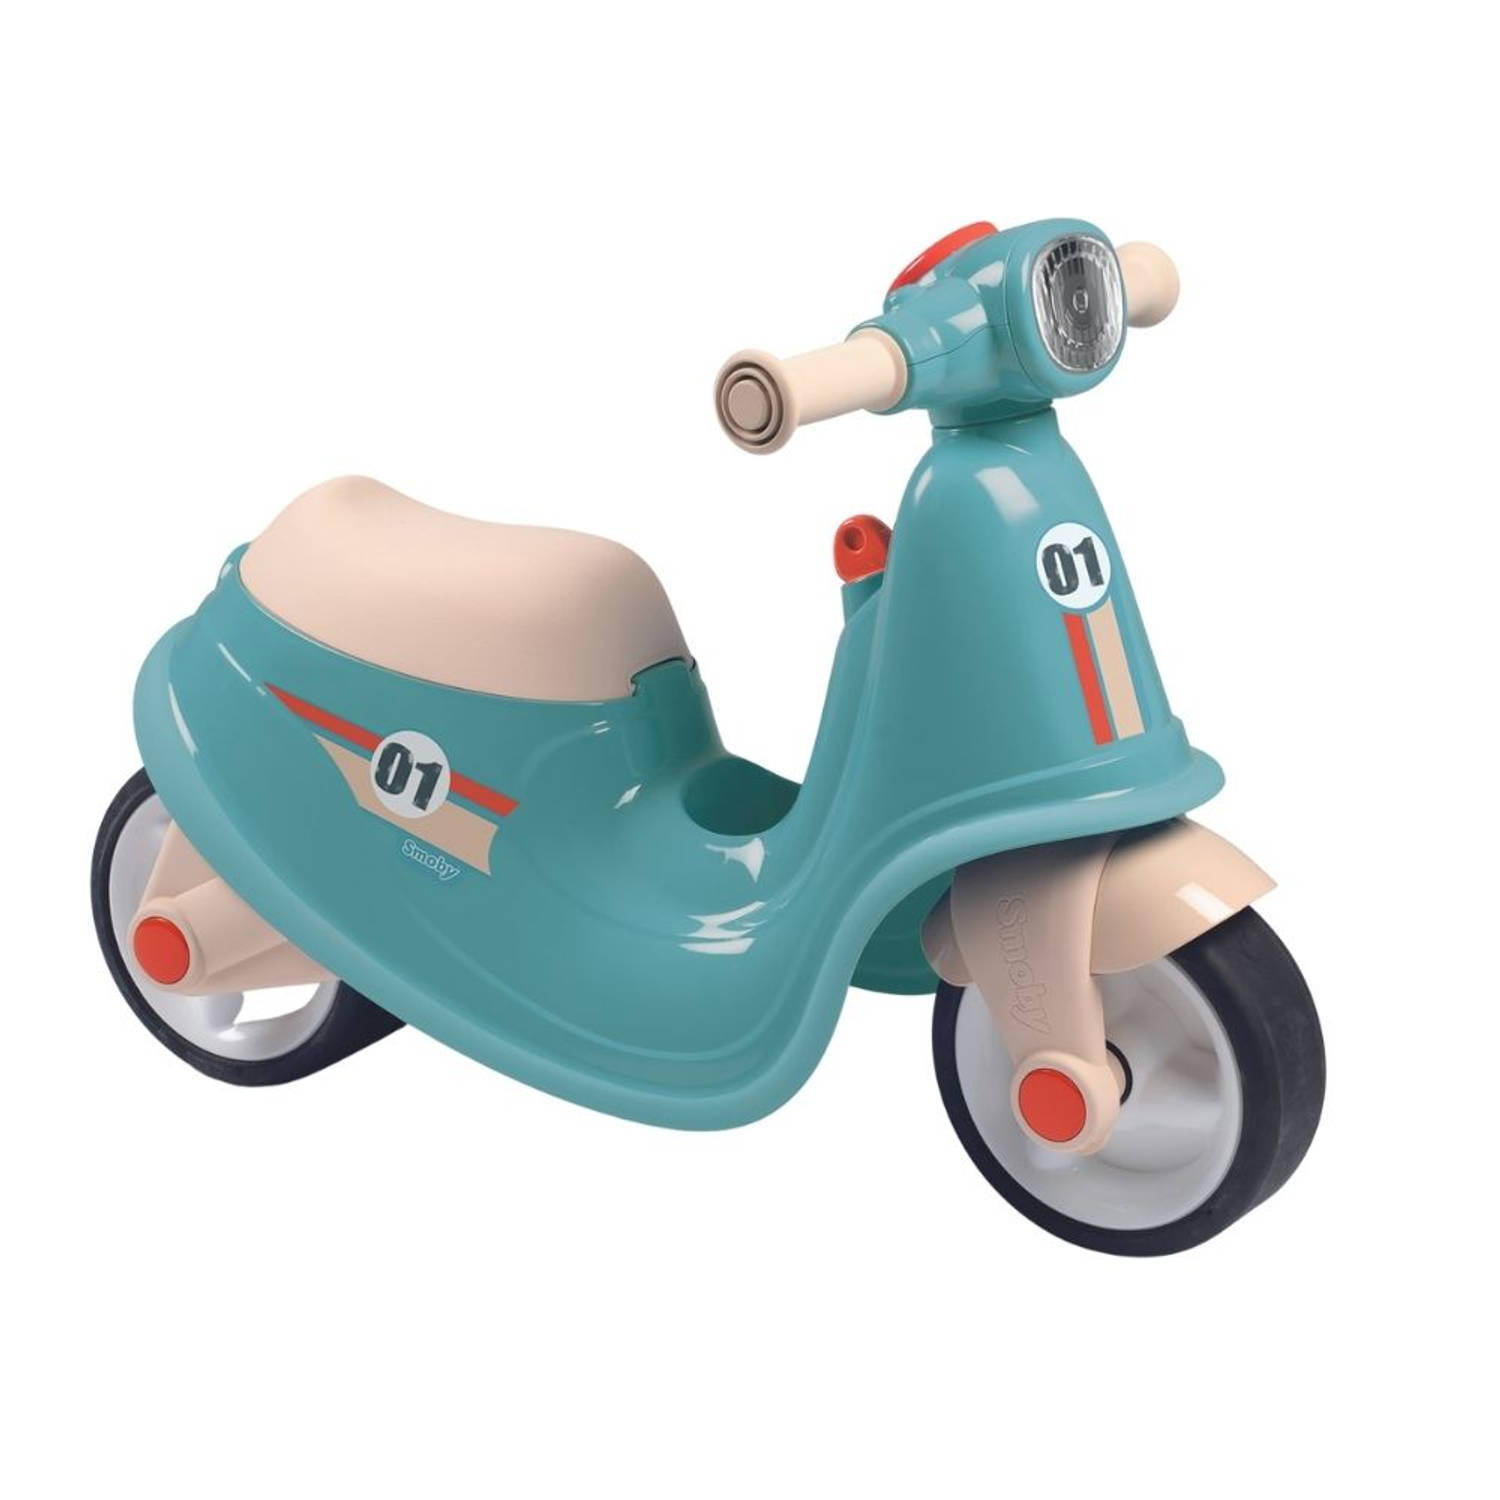 Smoby Scooter Ride On Loopfiets Blauw